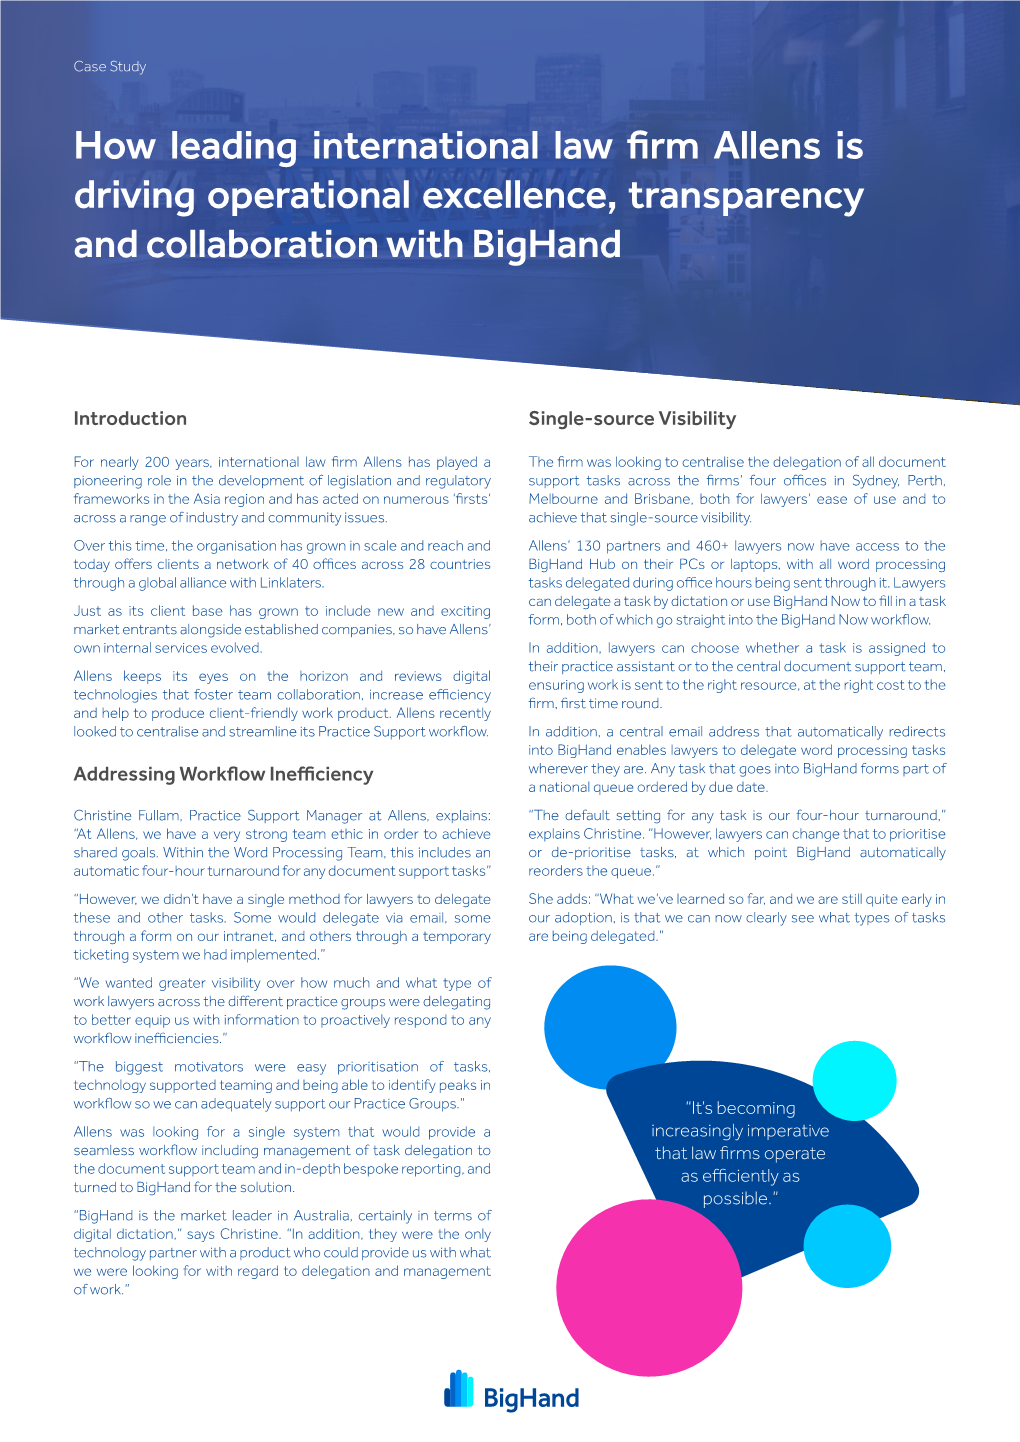 How Leading International Law Firm Allens Is Driving Operational Excellence, Transparency and Collaboration with Bighand